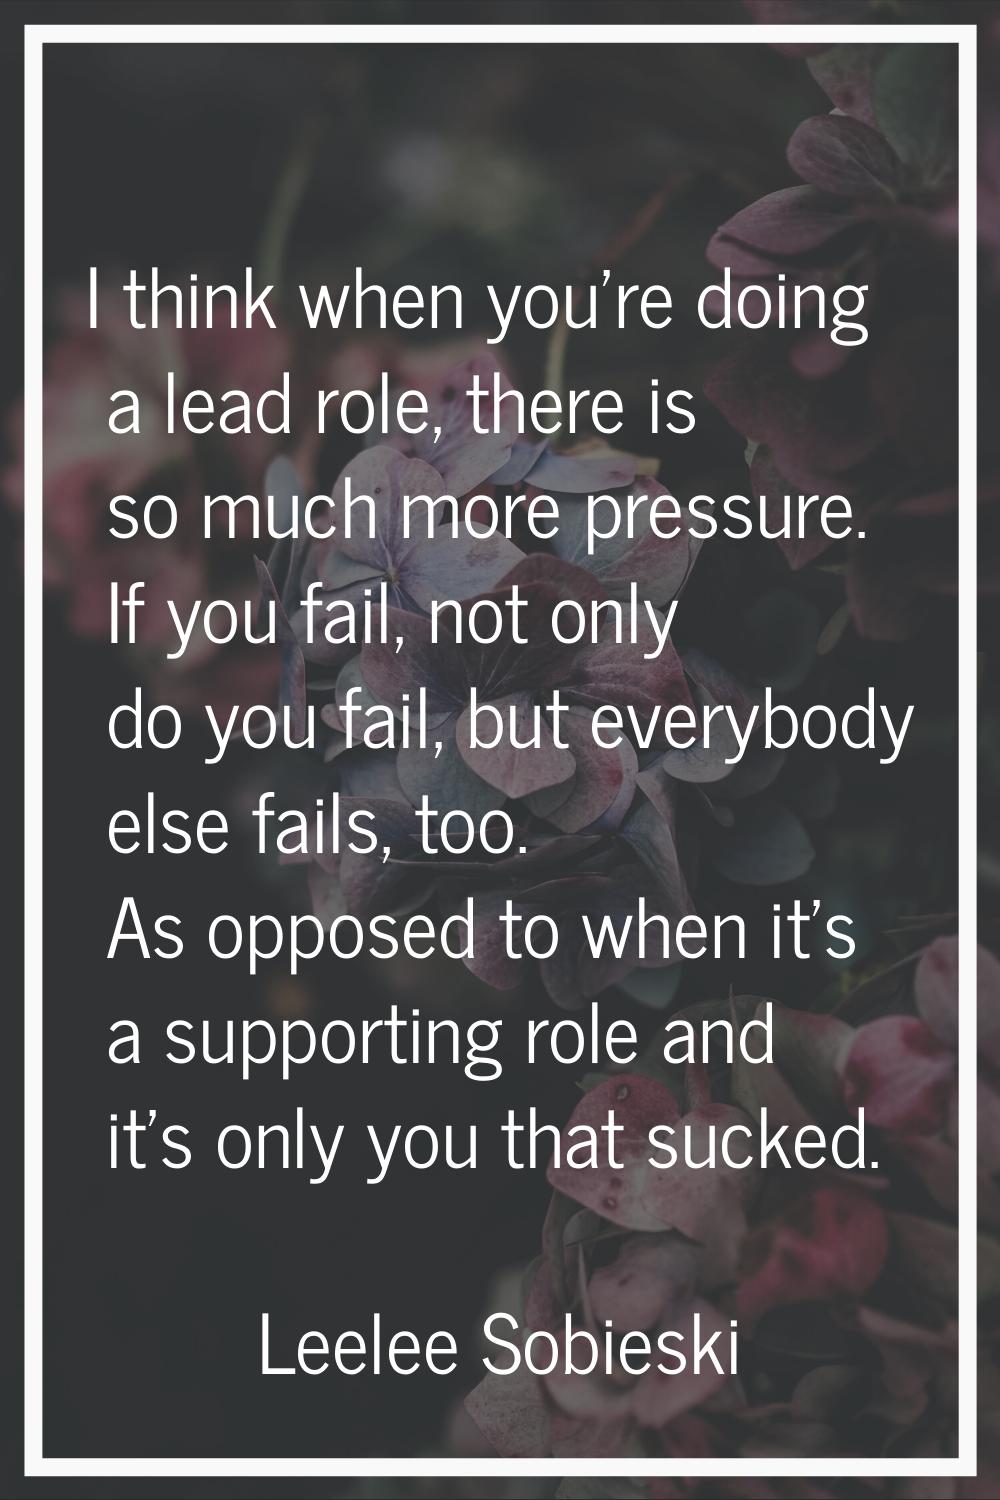 I think when you're doing a lead role, there is so much more pressure. If you fail, not only do you